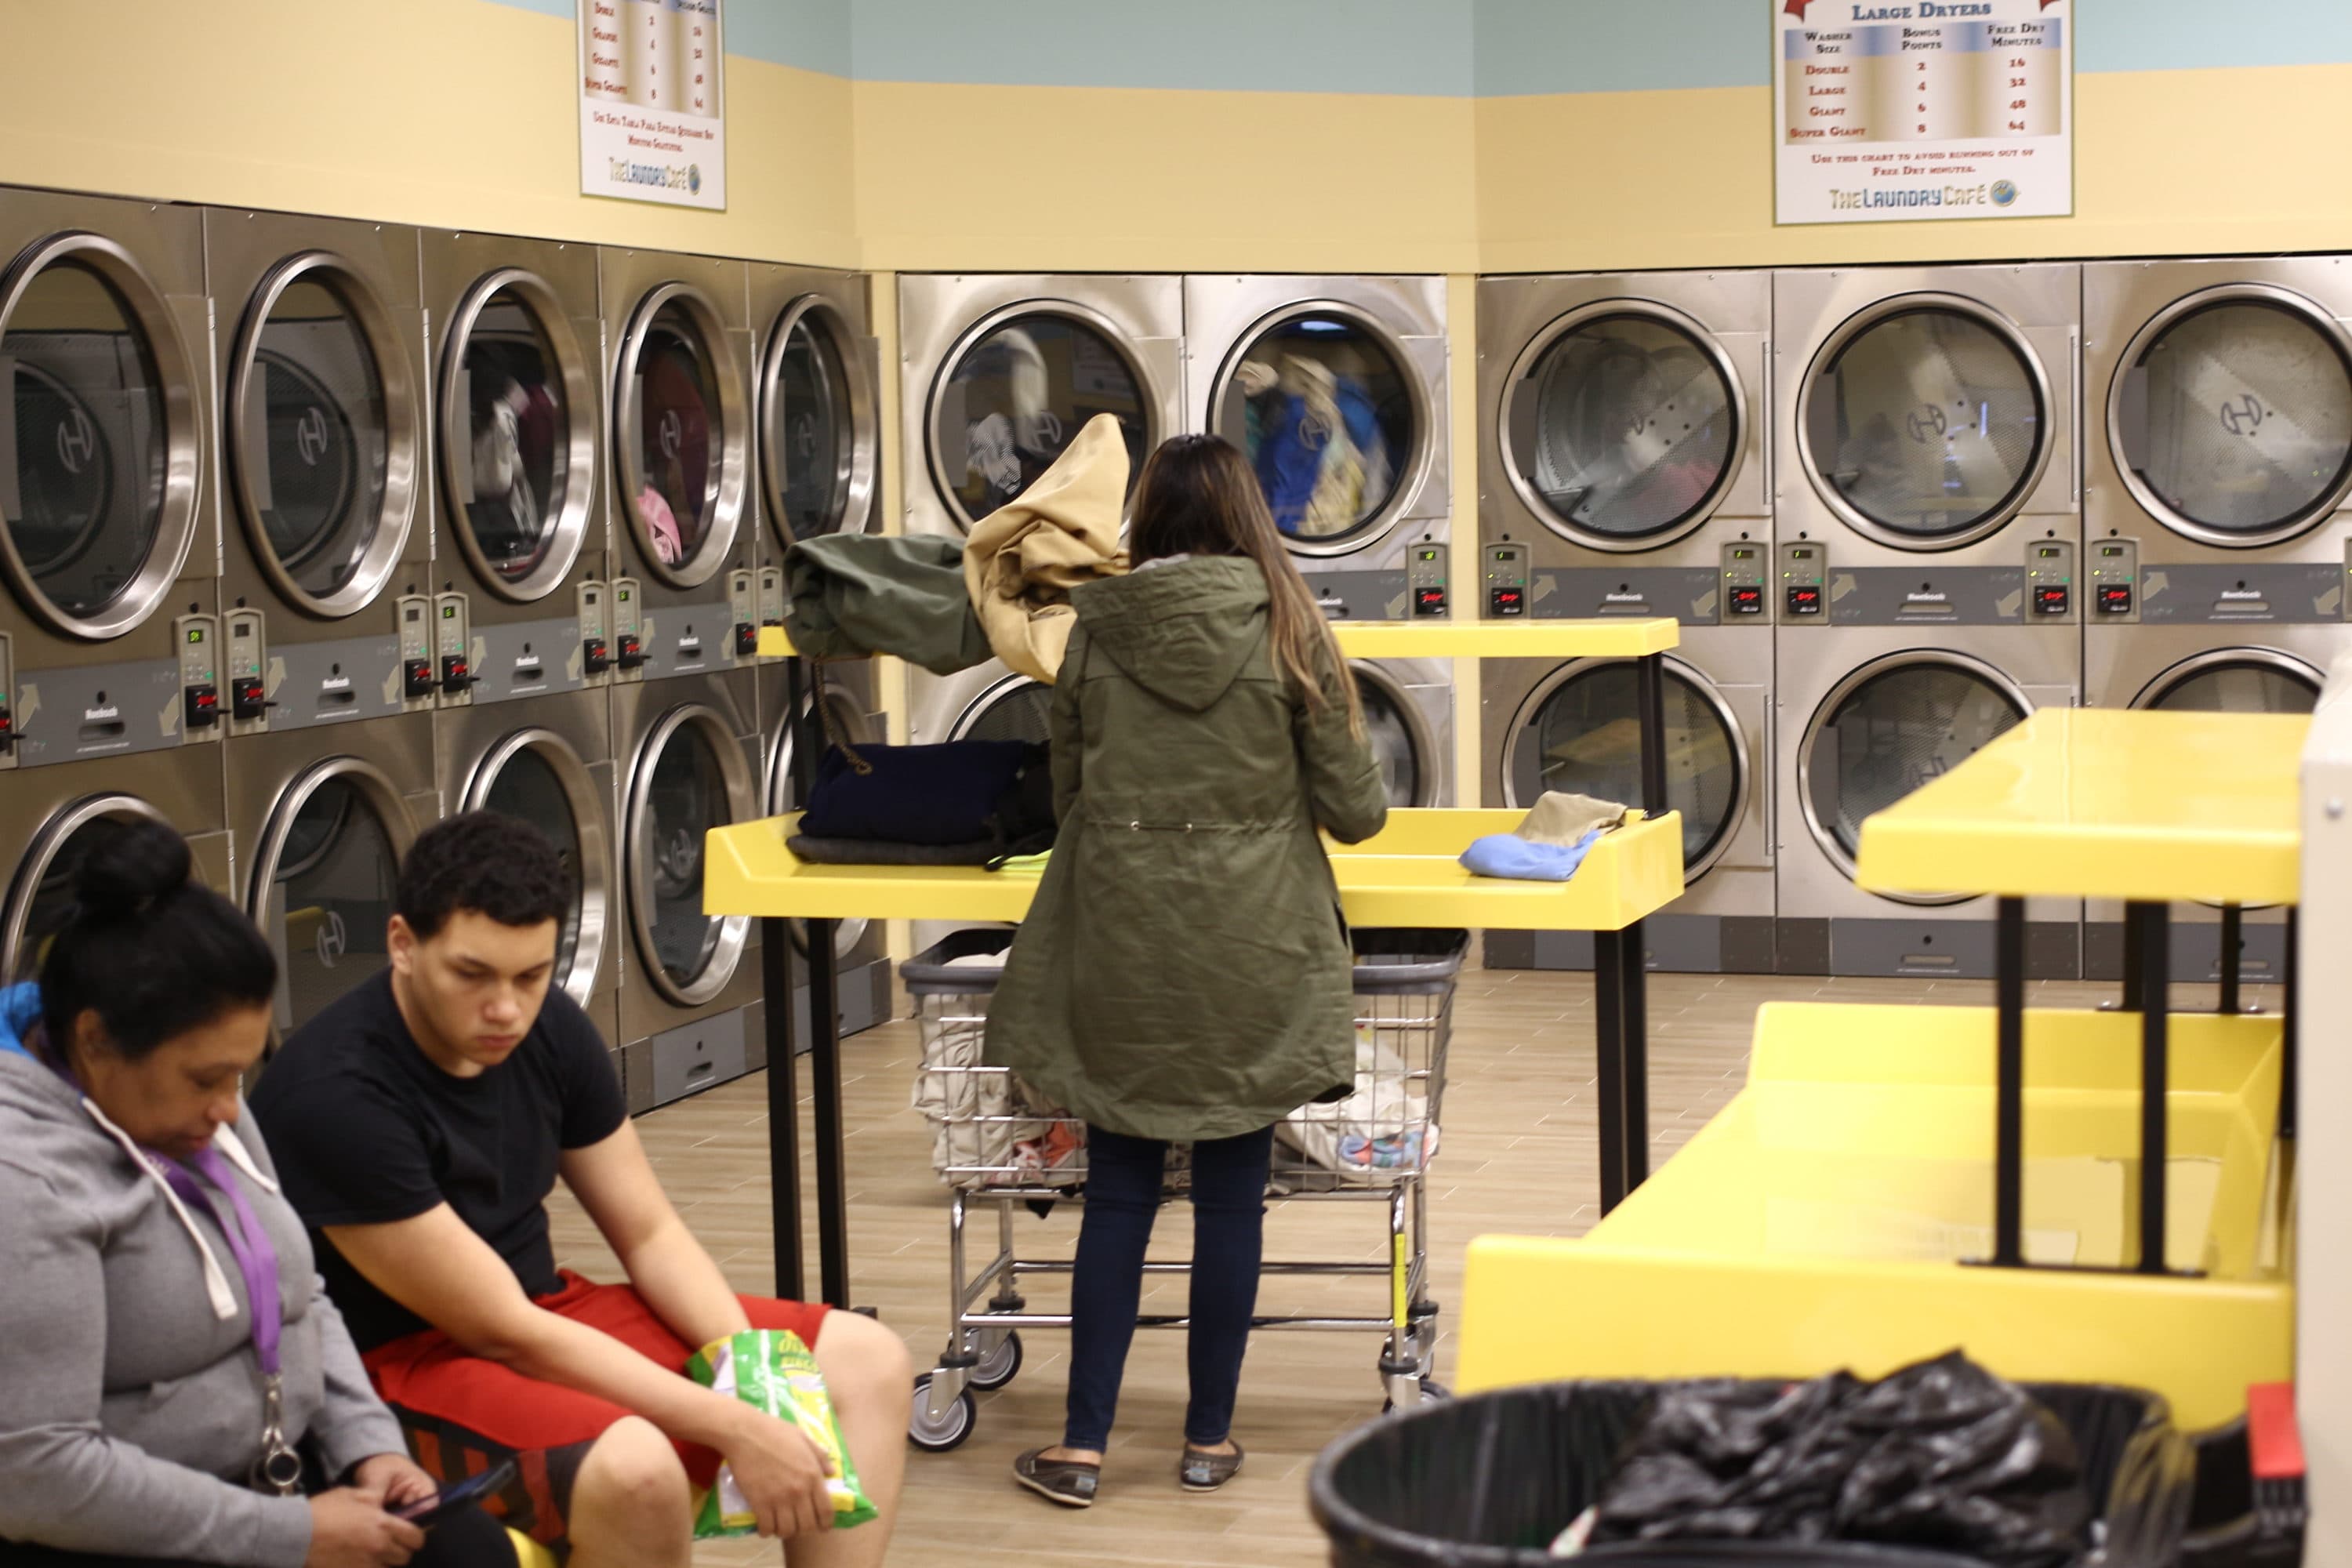 People Shouldn't Have To Risk Their Lives To Do The Laundry | Cognoscenti